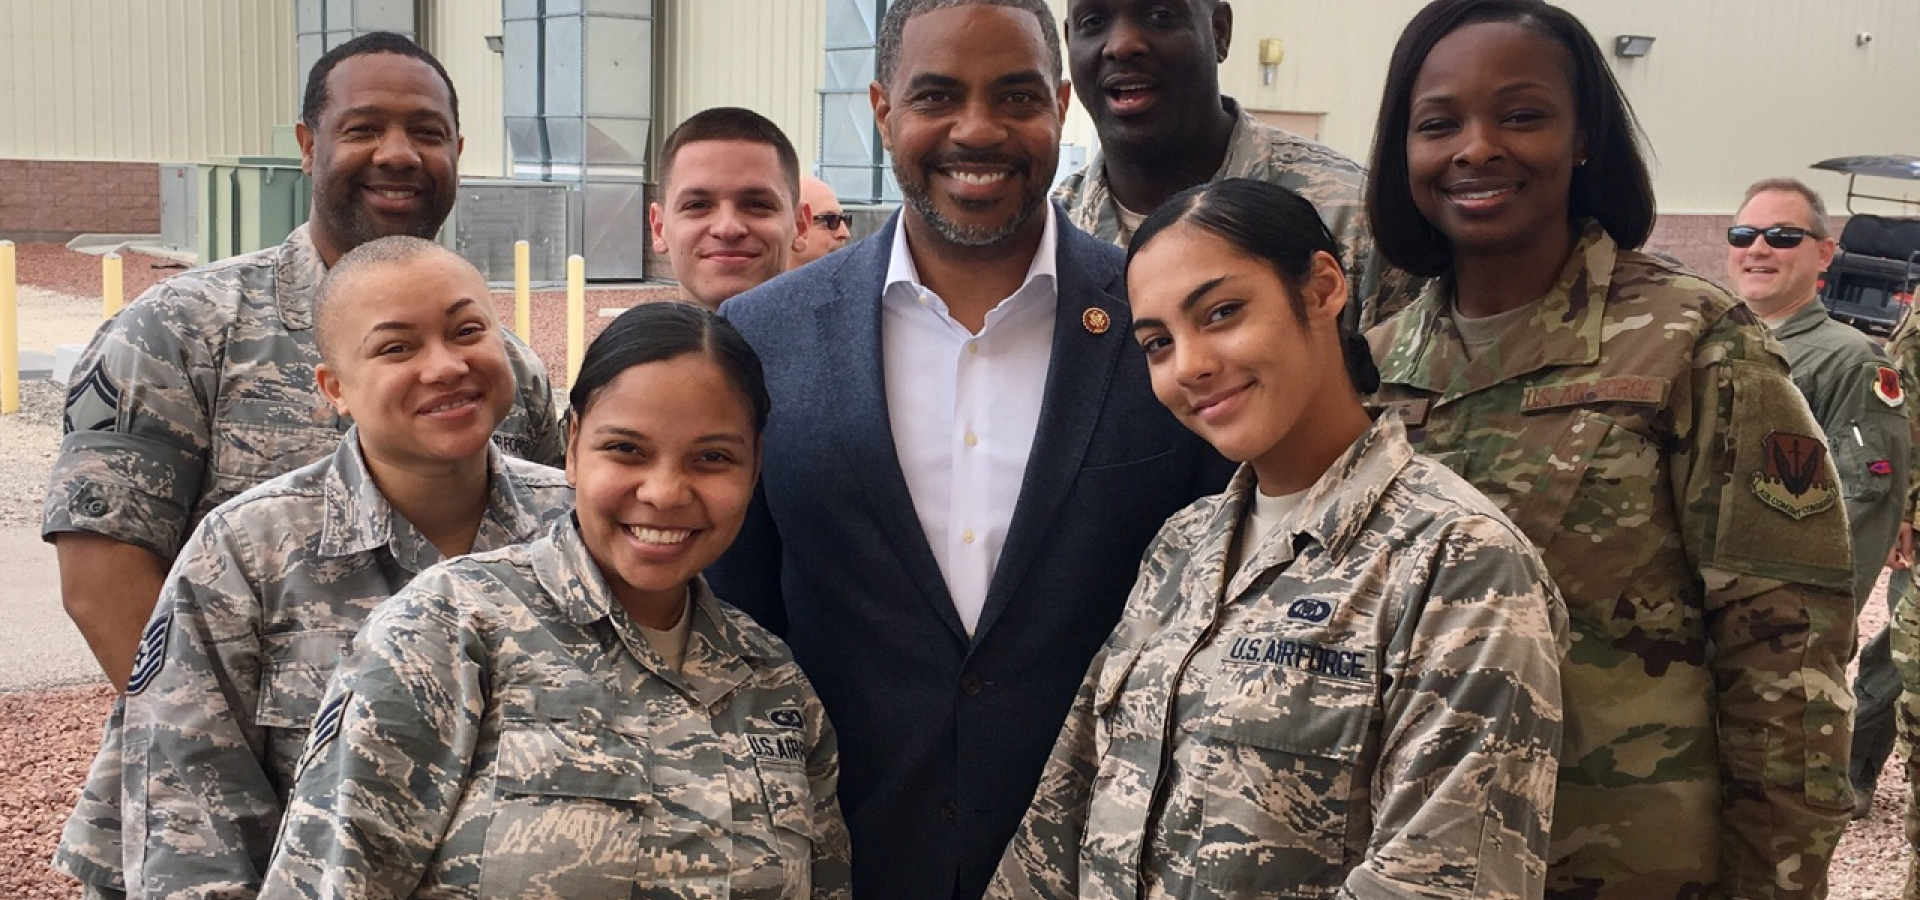 Rep. Horsford posing with members of the military